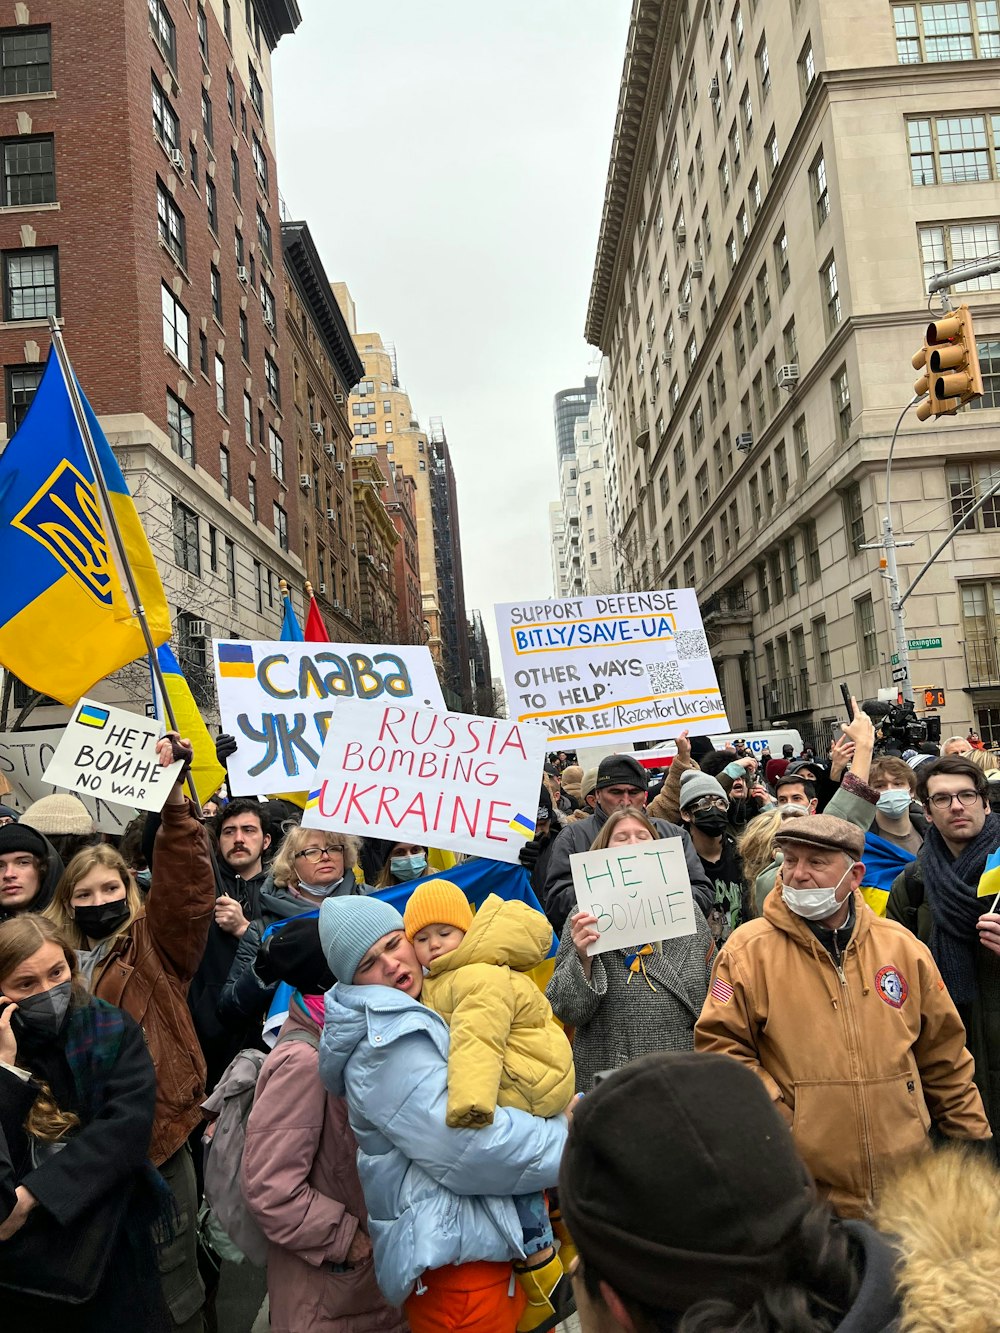 a large group of people holding signs in the street